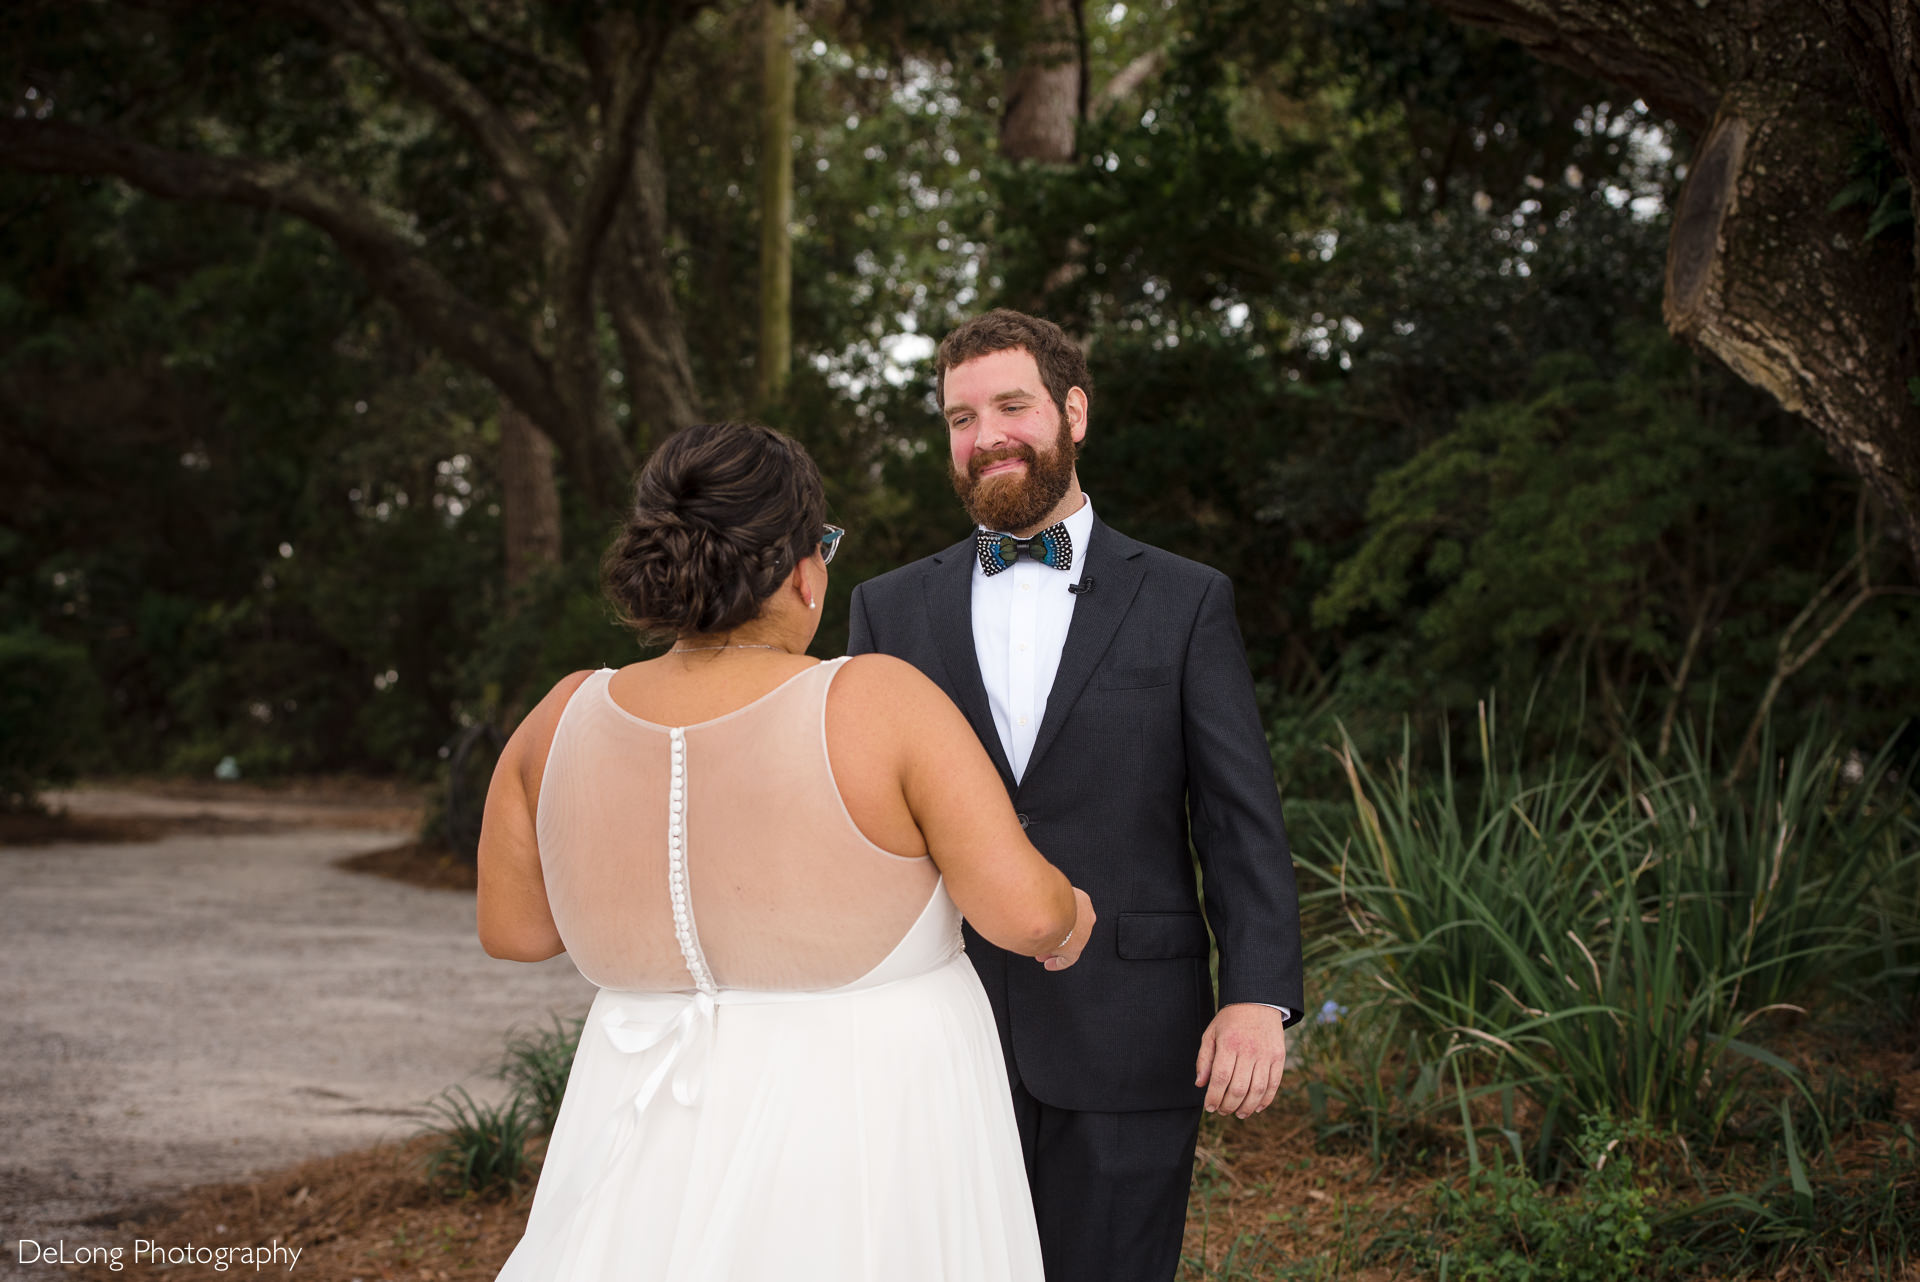 Groom smiling seeing the bride for the first time during a first look at the Island House by Charlotte Wedding Photographers DeLong Photography